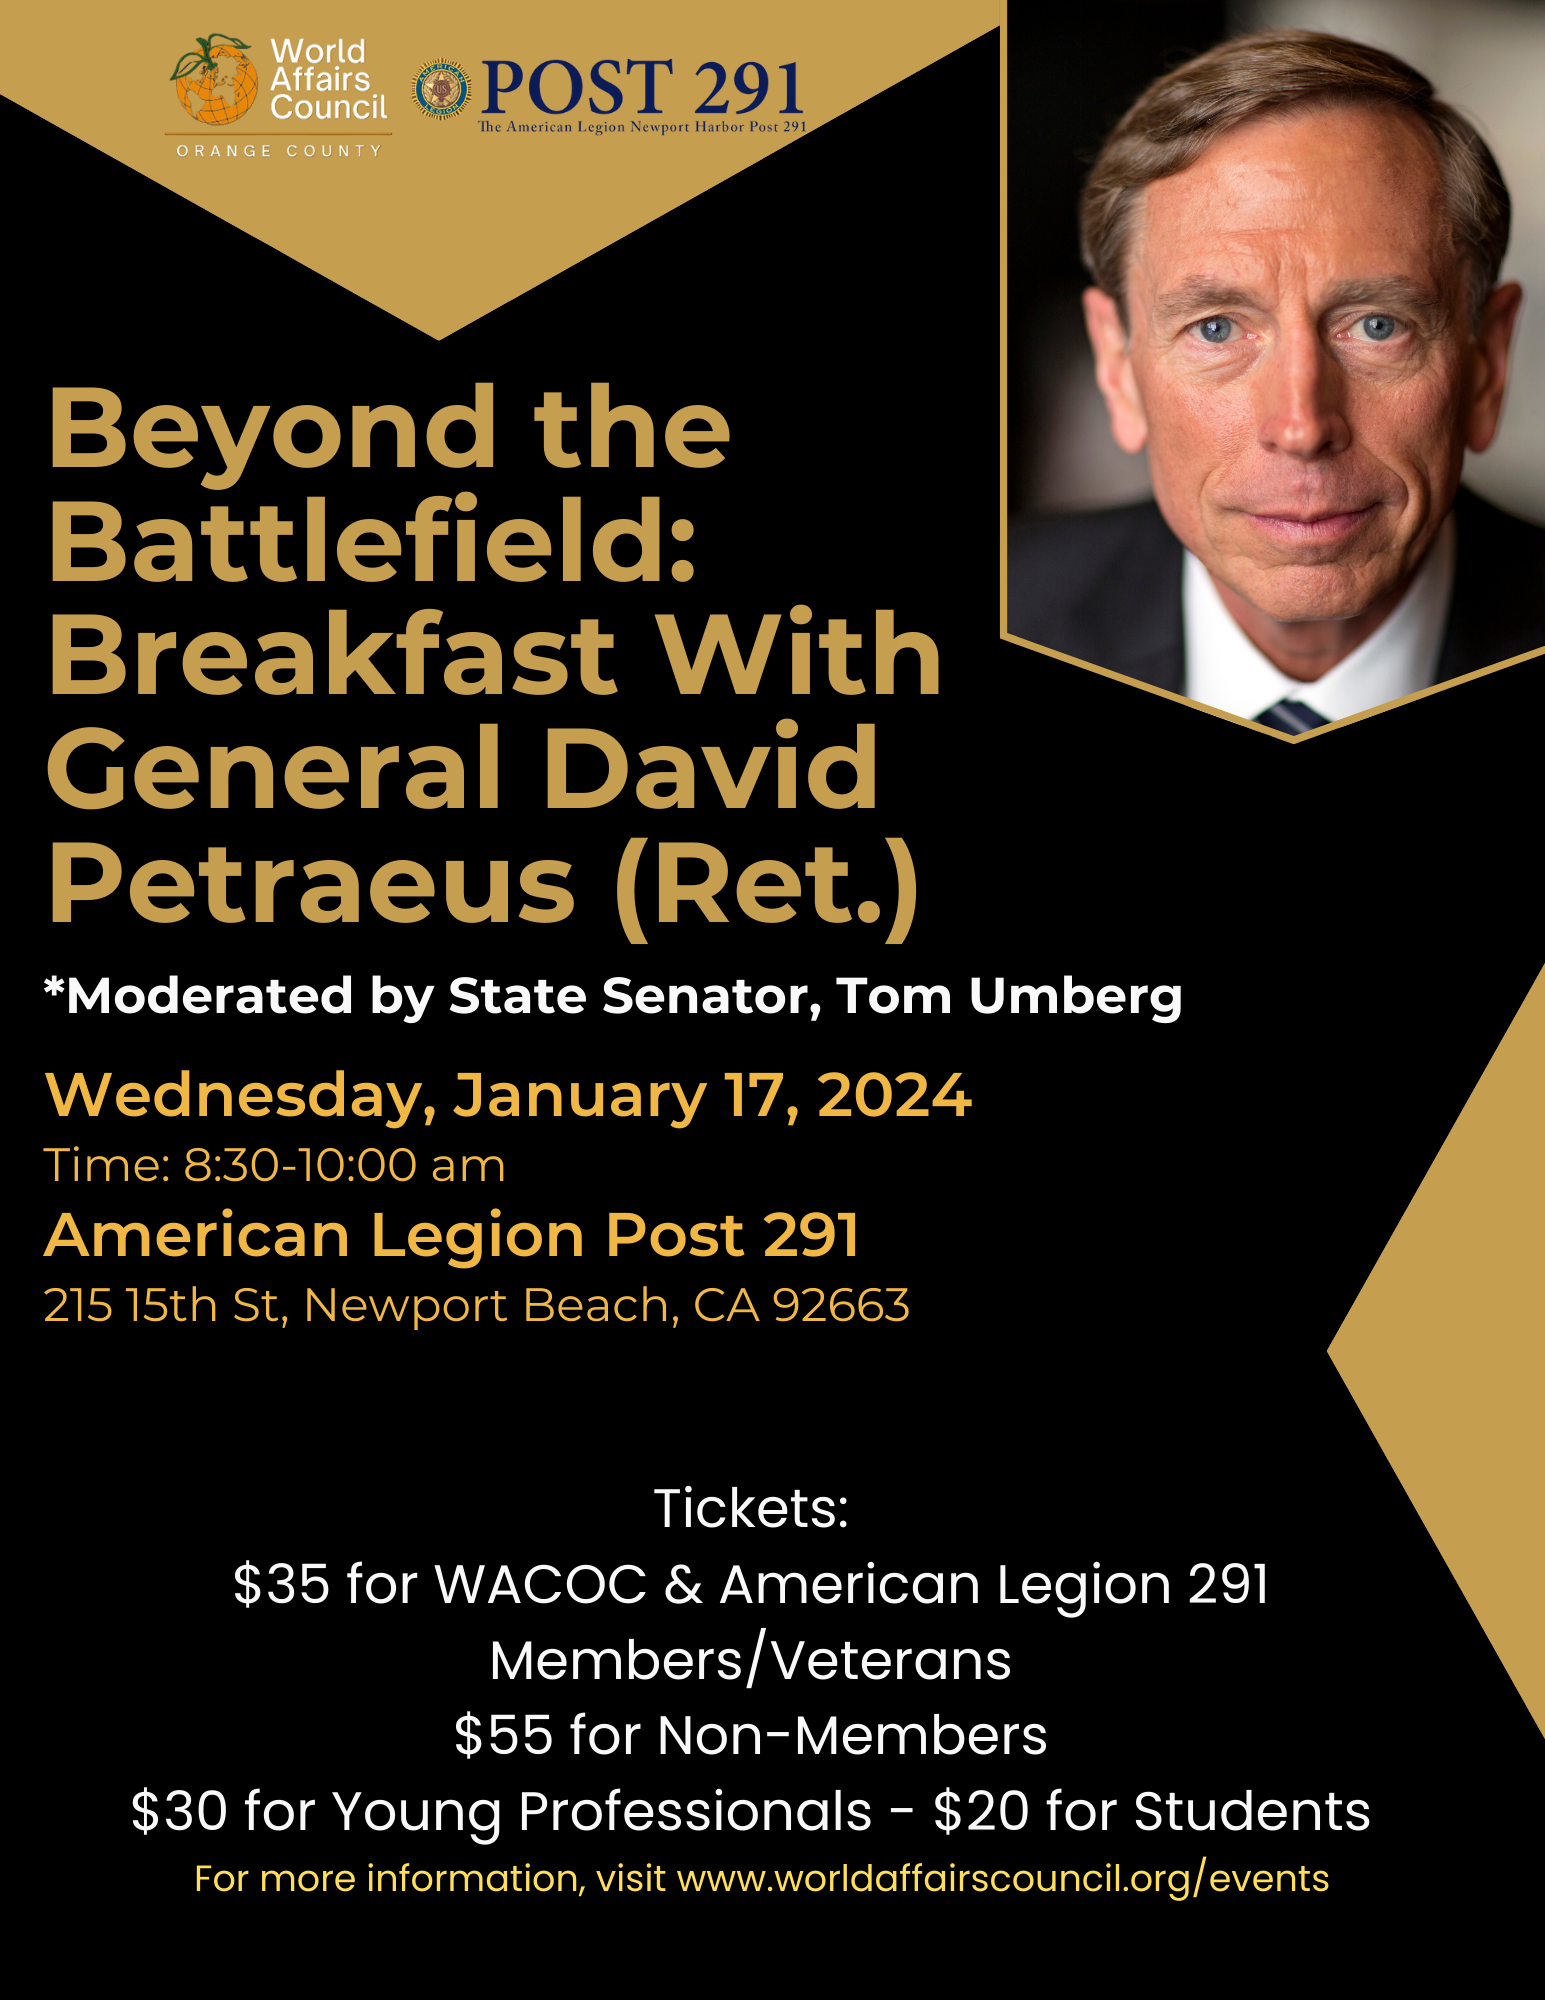 SOLD OUT: Beyond the Battlefield: Breakfast with General David Petraeus